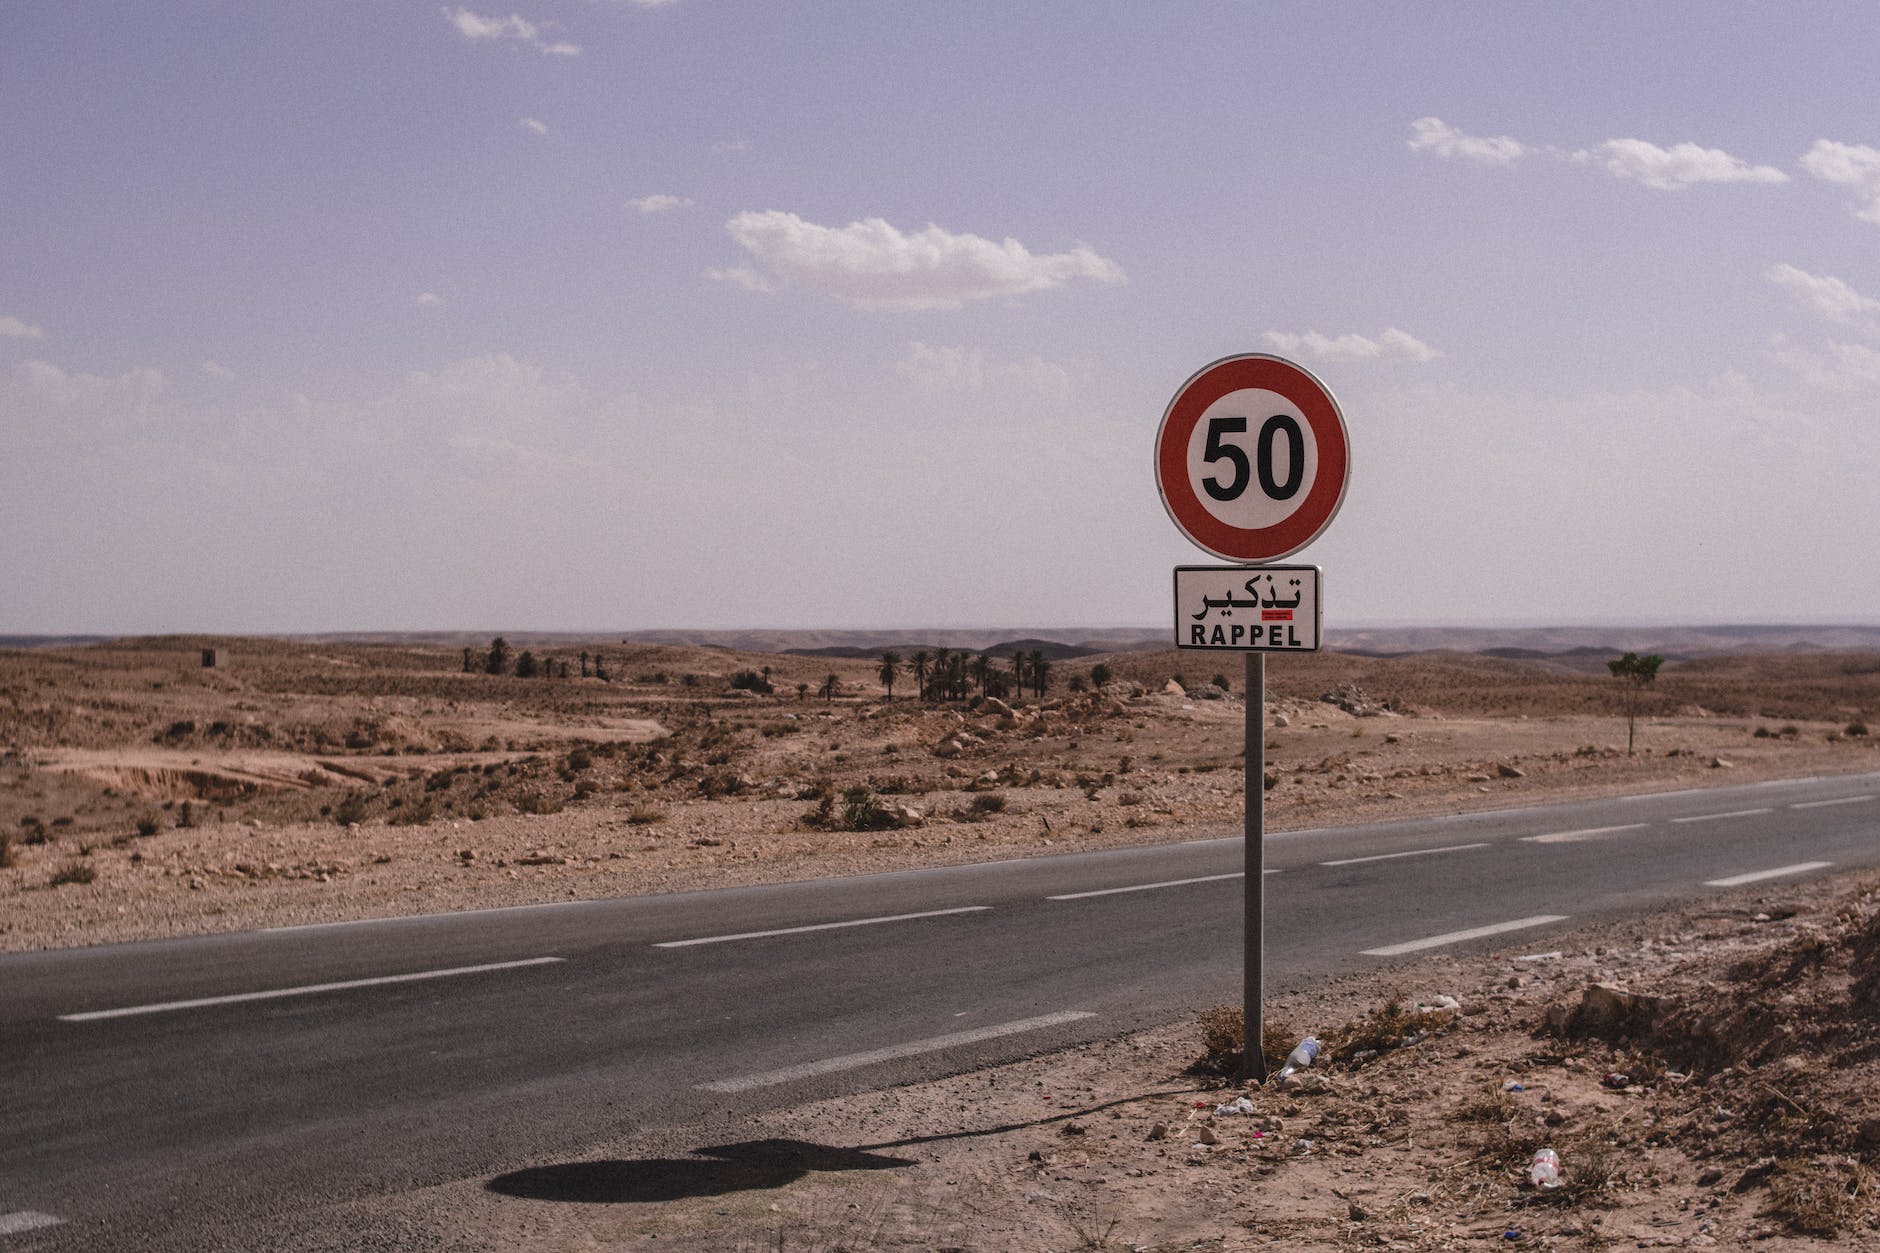 Who respects the speed limits on highways?